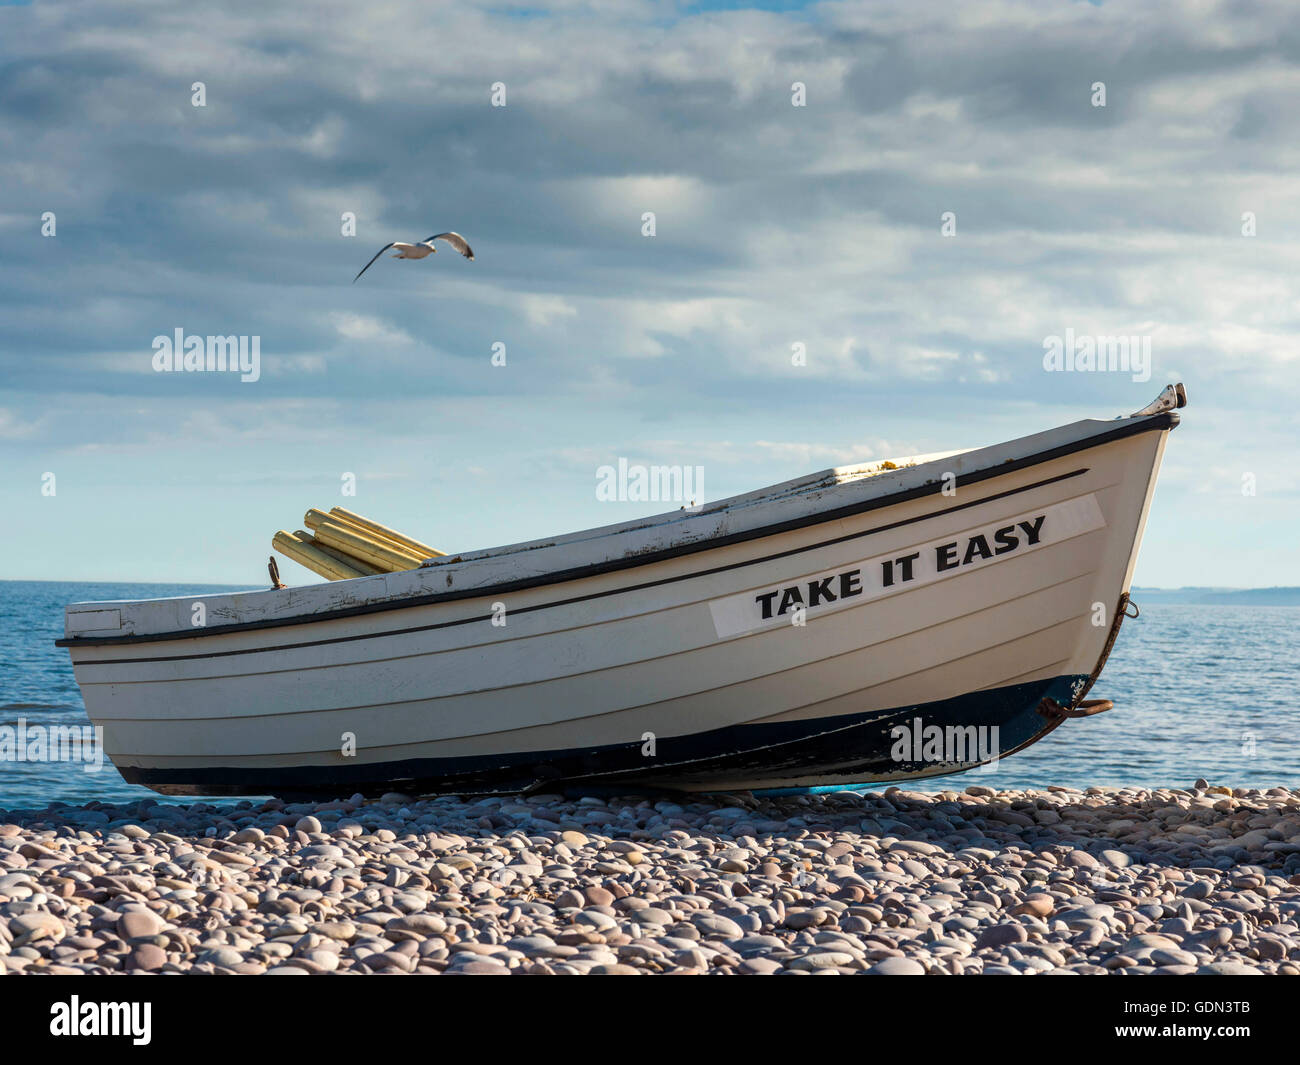 Take It Easy - Seaside scene, depicting a blue ocean background with boat in the mid-ground and a pebble beach foreground. Stock Photo